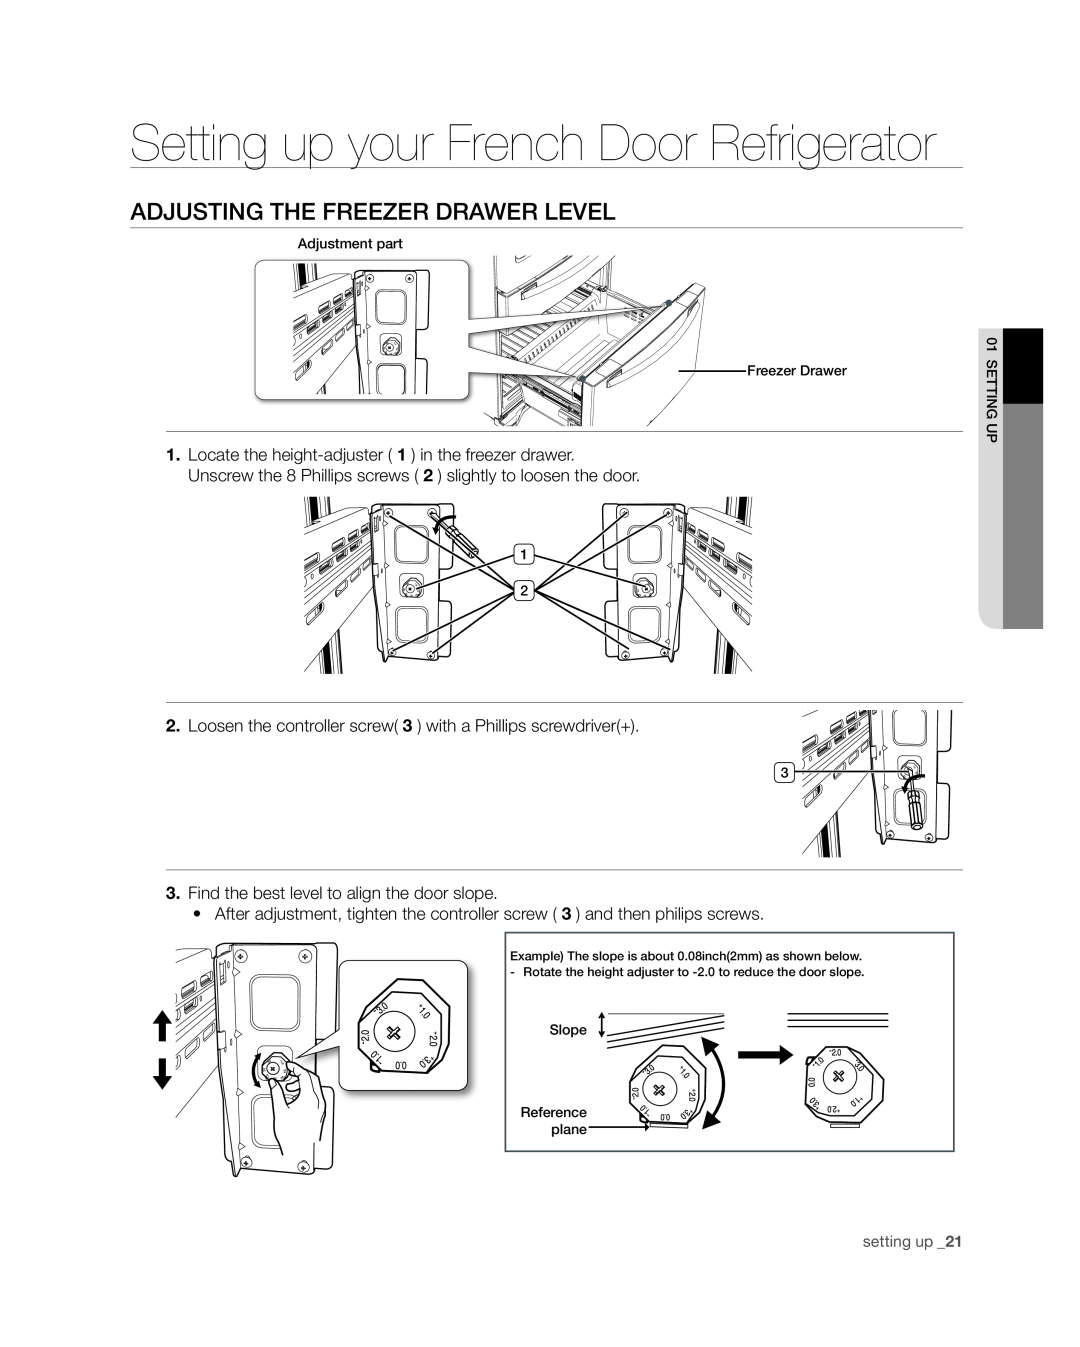 Samsung RF4287HA user manual Adjusting the freezer drawer level, Setting up your French Door Refrigerator, setting up 